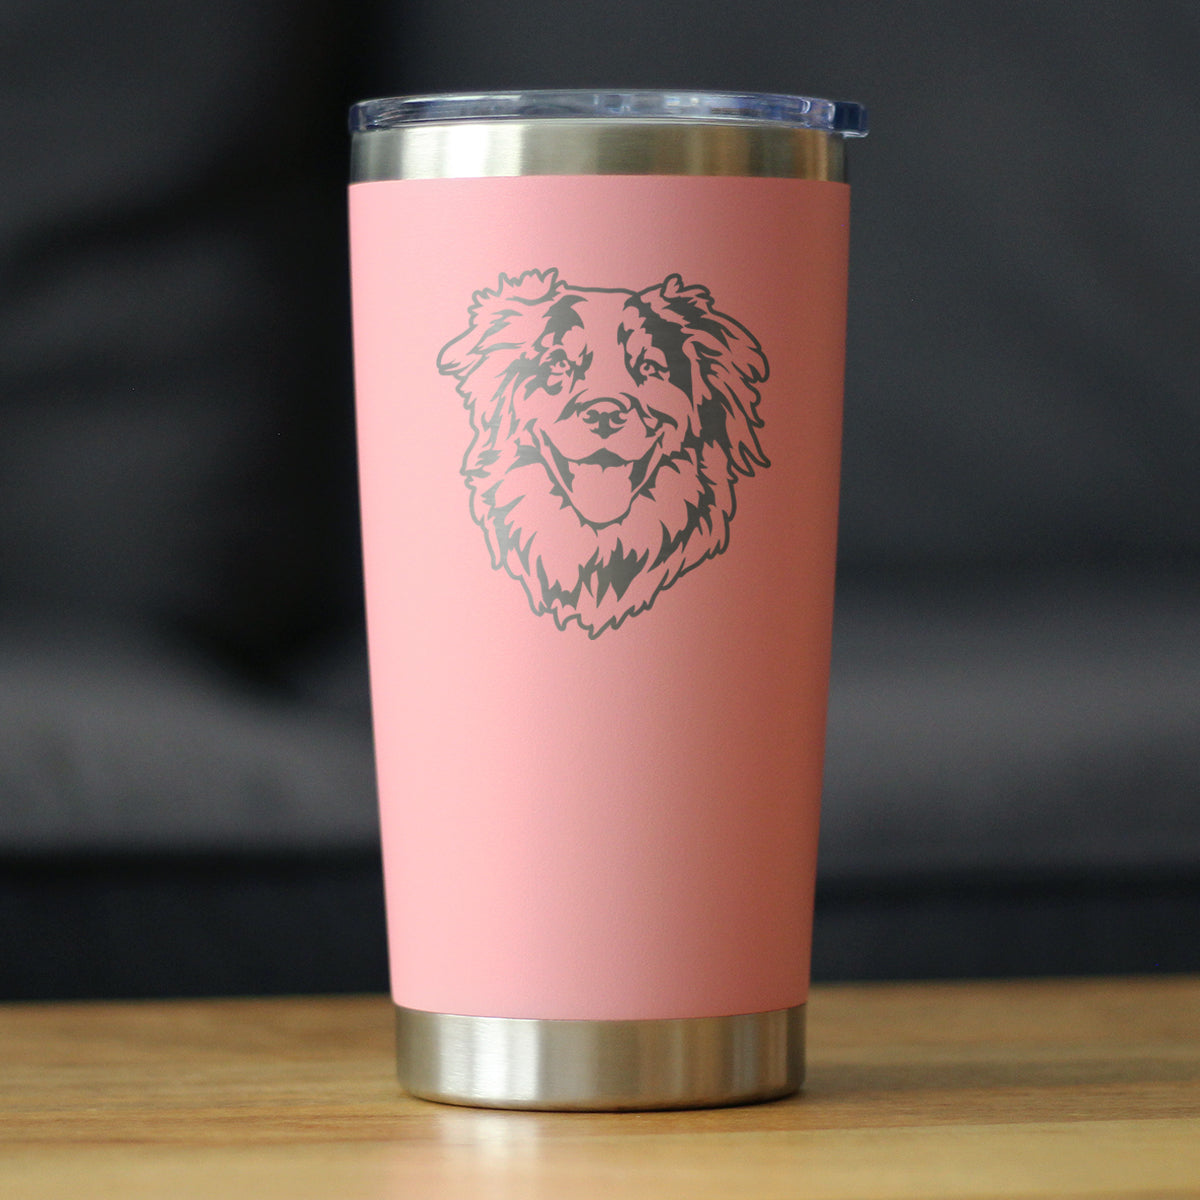 Australian Shepherd Face - Insulated Coffee Tumbler Cup with Sliding Lid - Stainless Steel Travel Mug - Unique Dog Gifts for Aussie Lovers